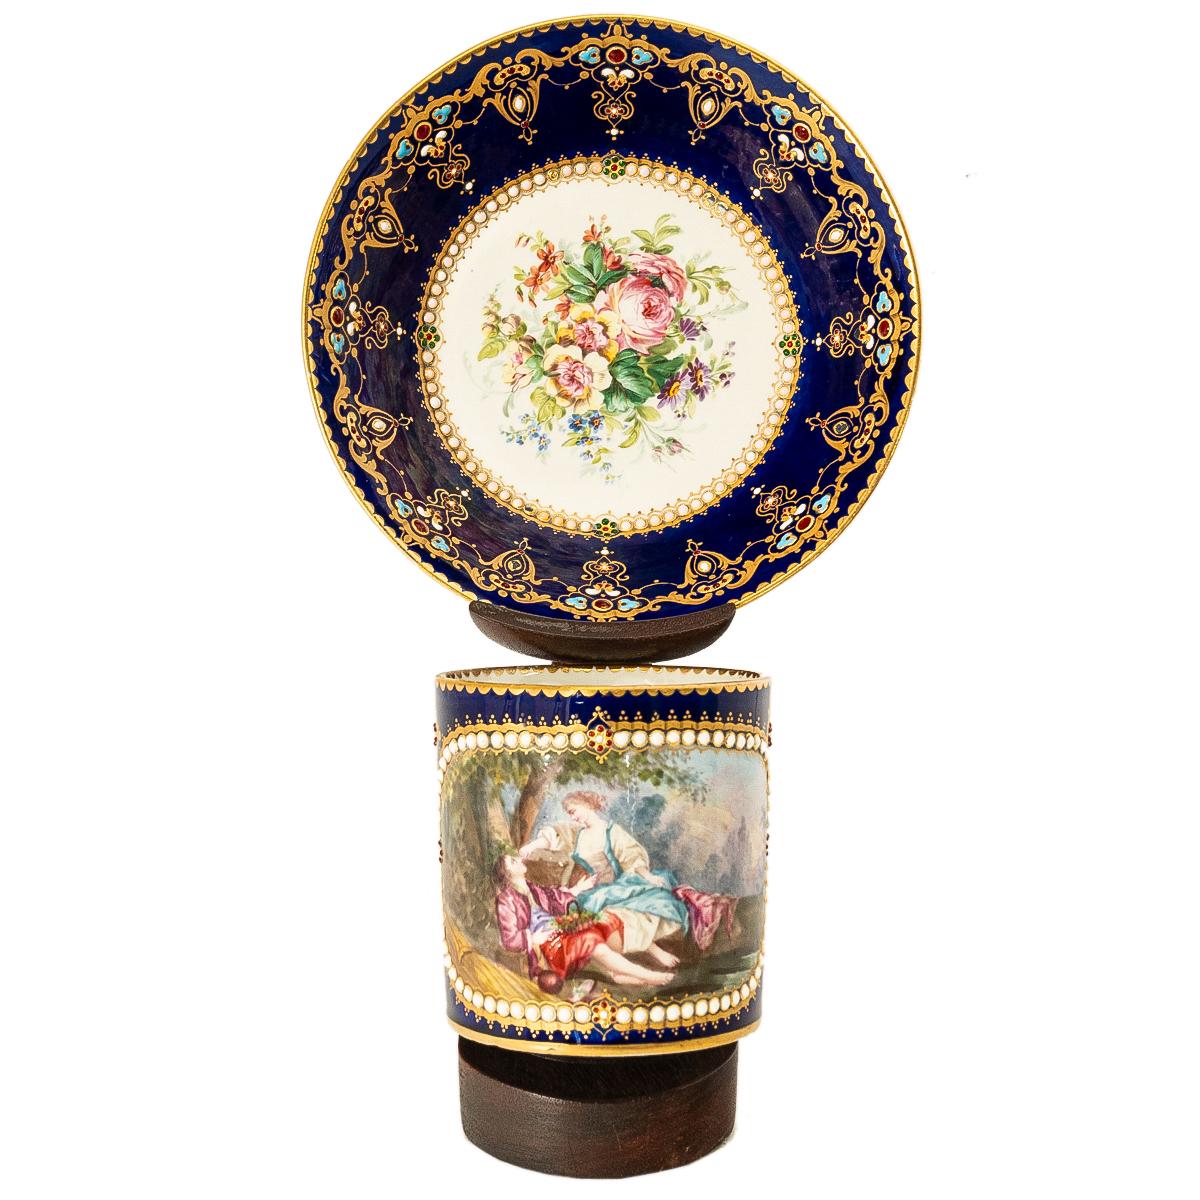 An 18th century Sevres blue ground cabinet cup and saucer with central Watteauesque style painted panel to the cup, within enamelled and jewelled style border, the saucer with painted floral spray. Both the saucer & cup with a painted blue